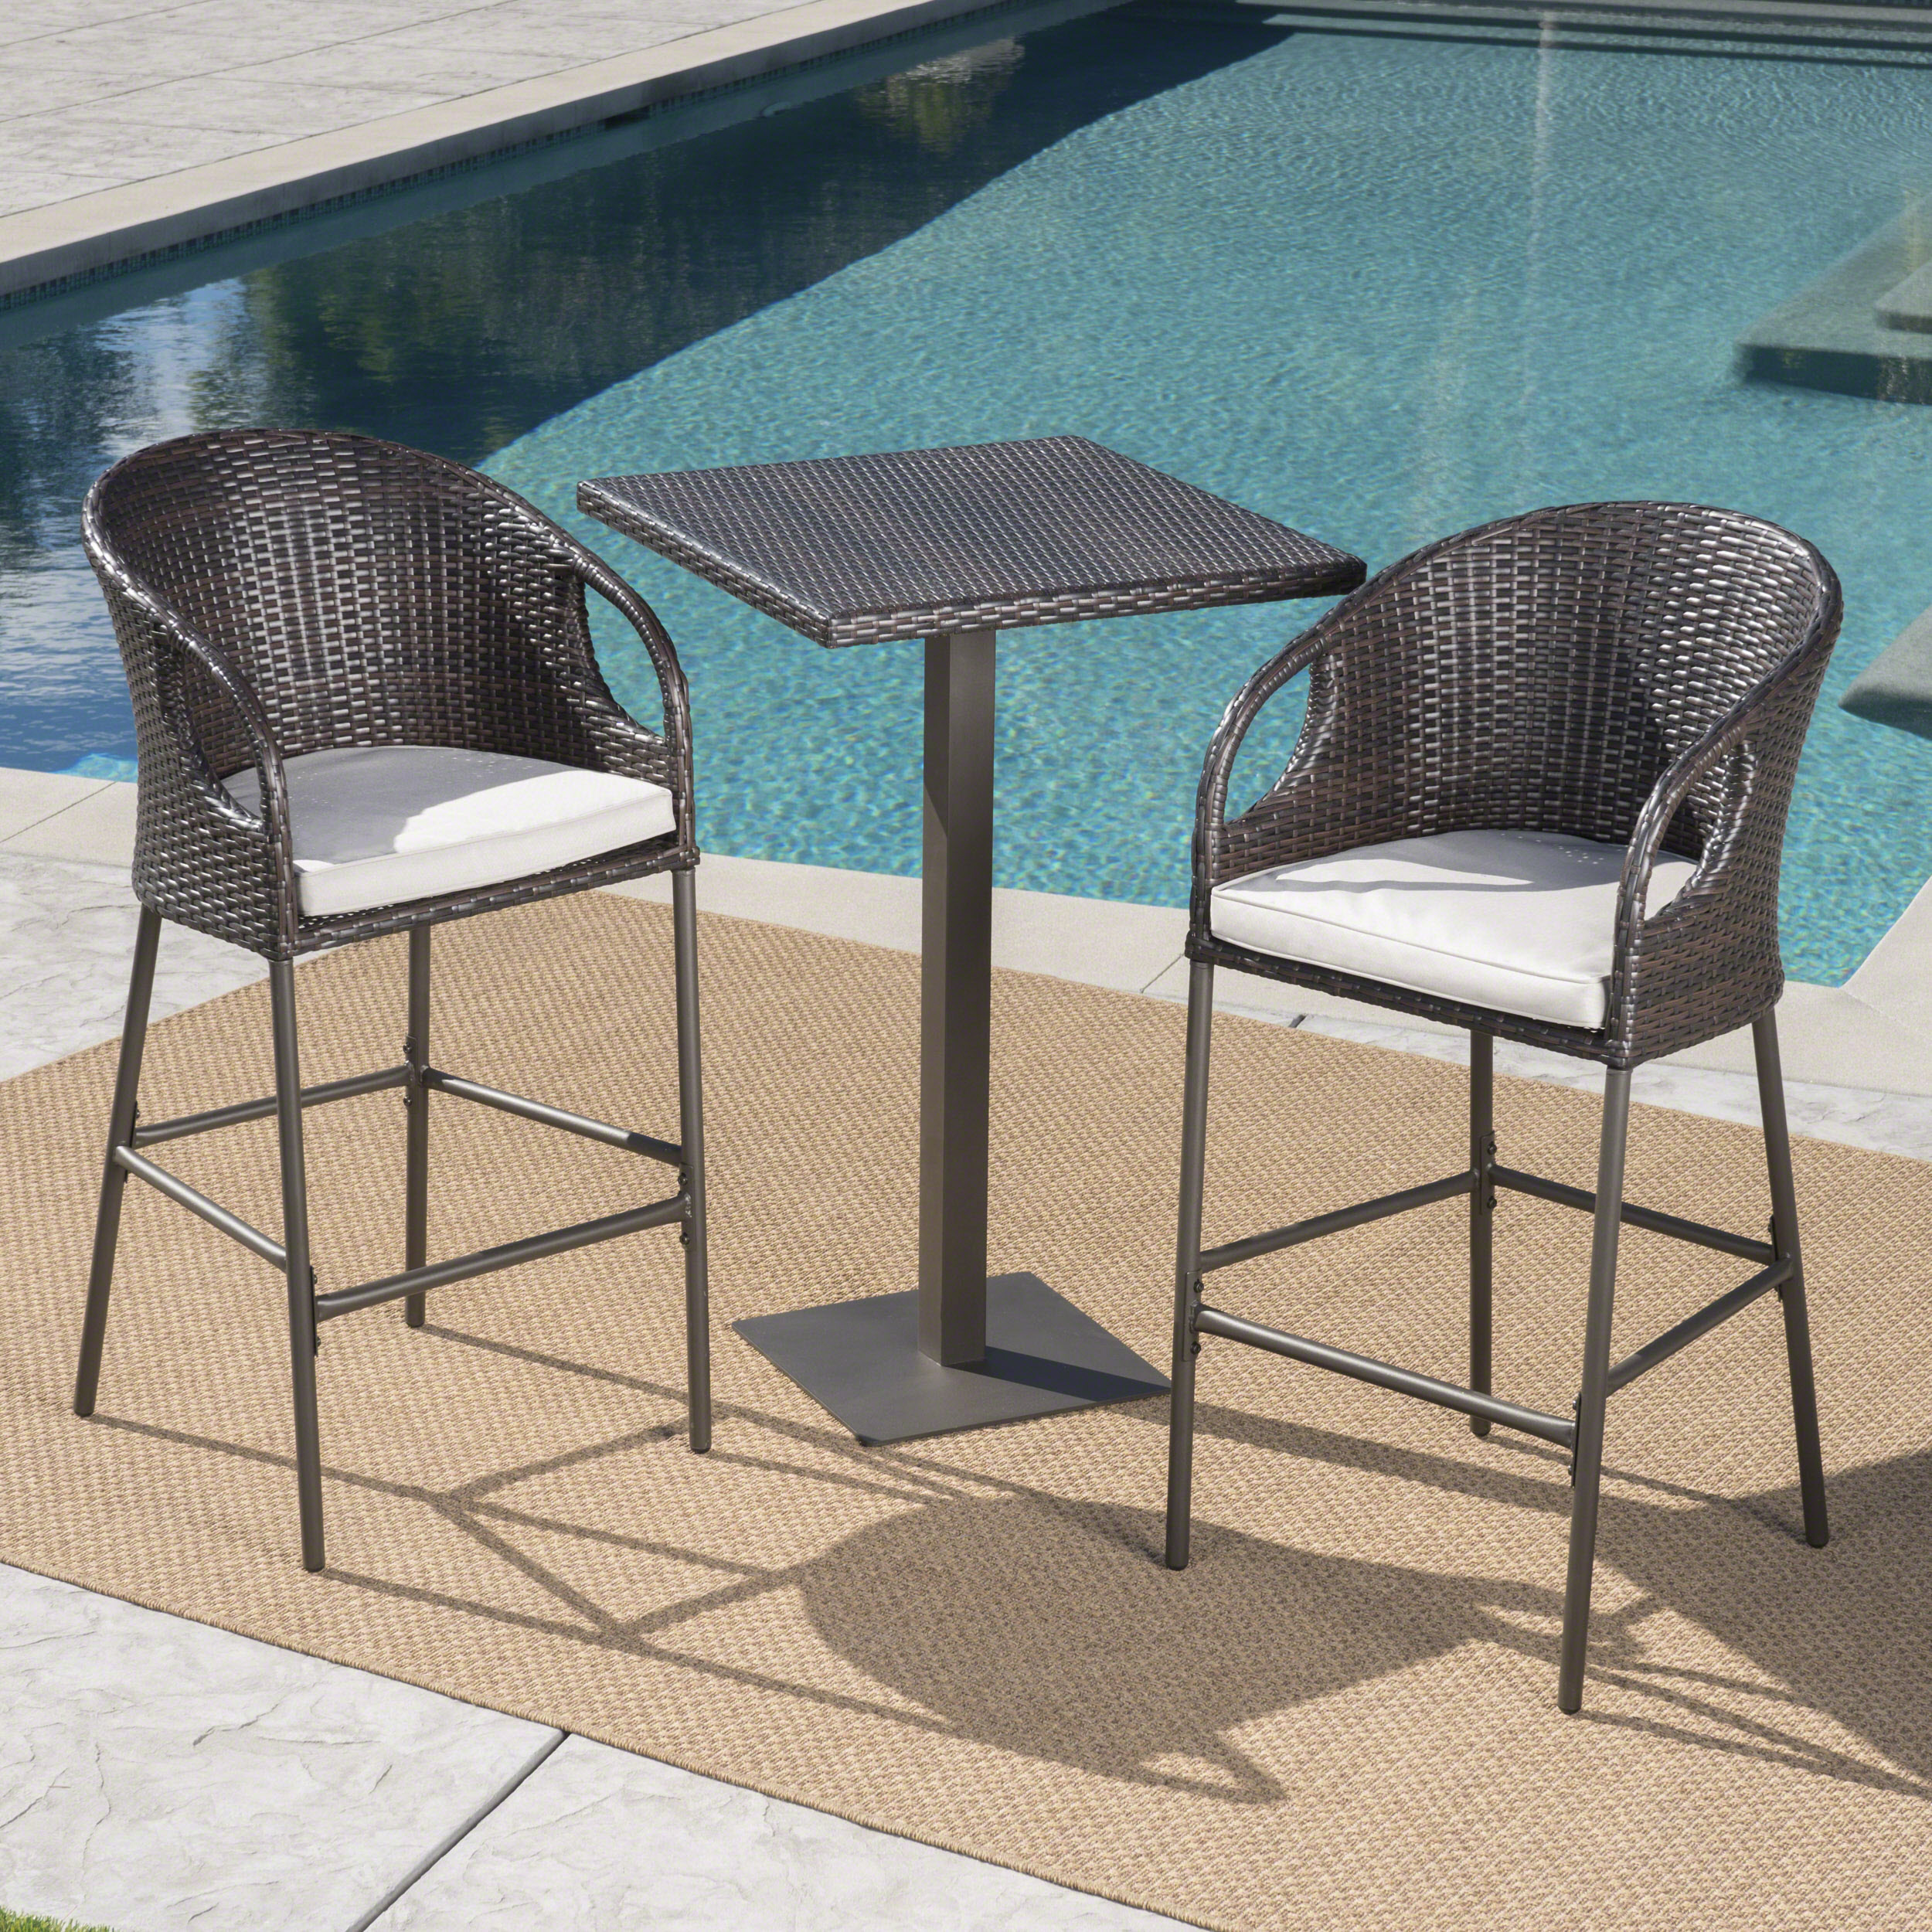 GDF Studio Mayhill Outdoor Wicker 3 Piece Bistro Bar Set with Cushion, Multibrown and Light Brown - image 3 of 13